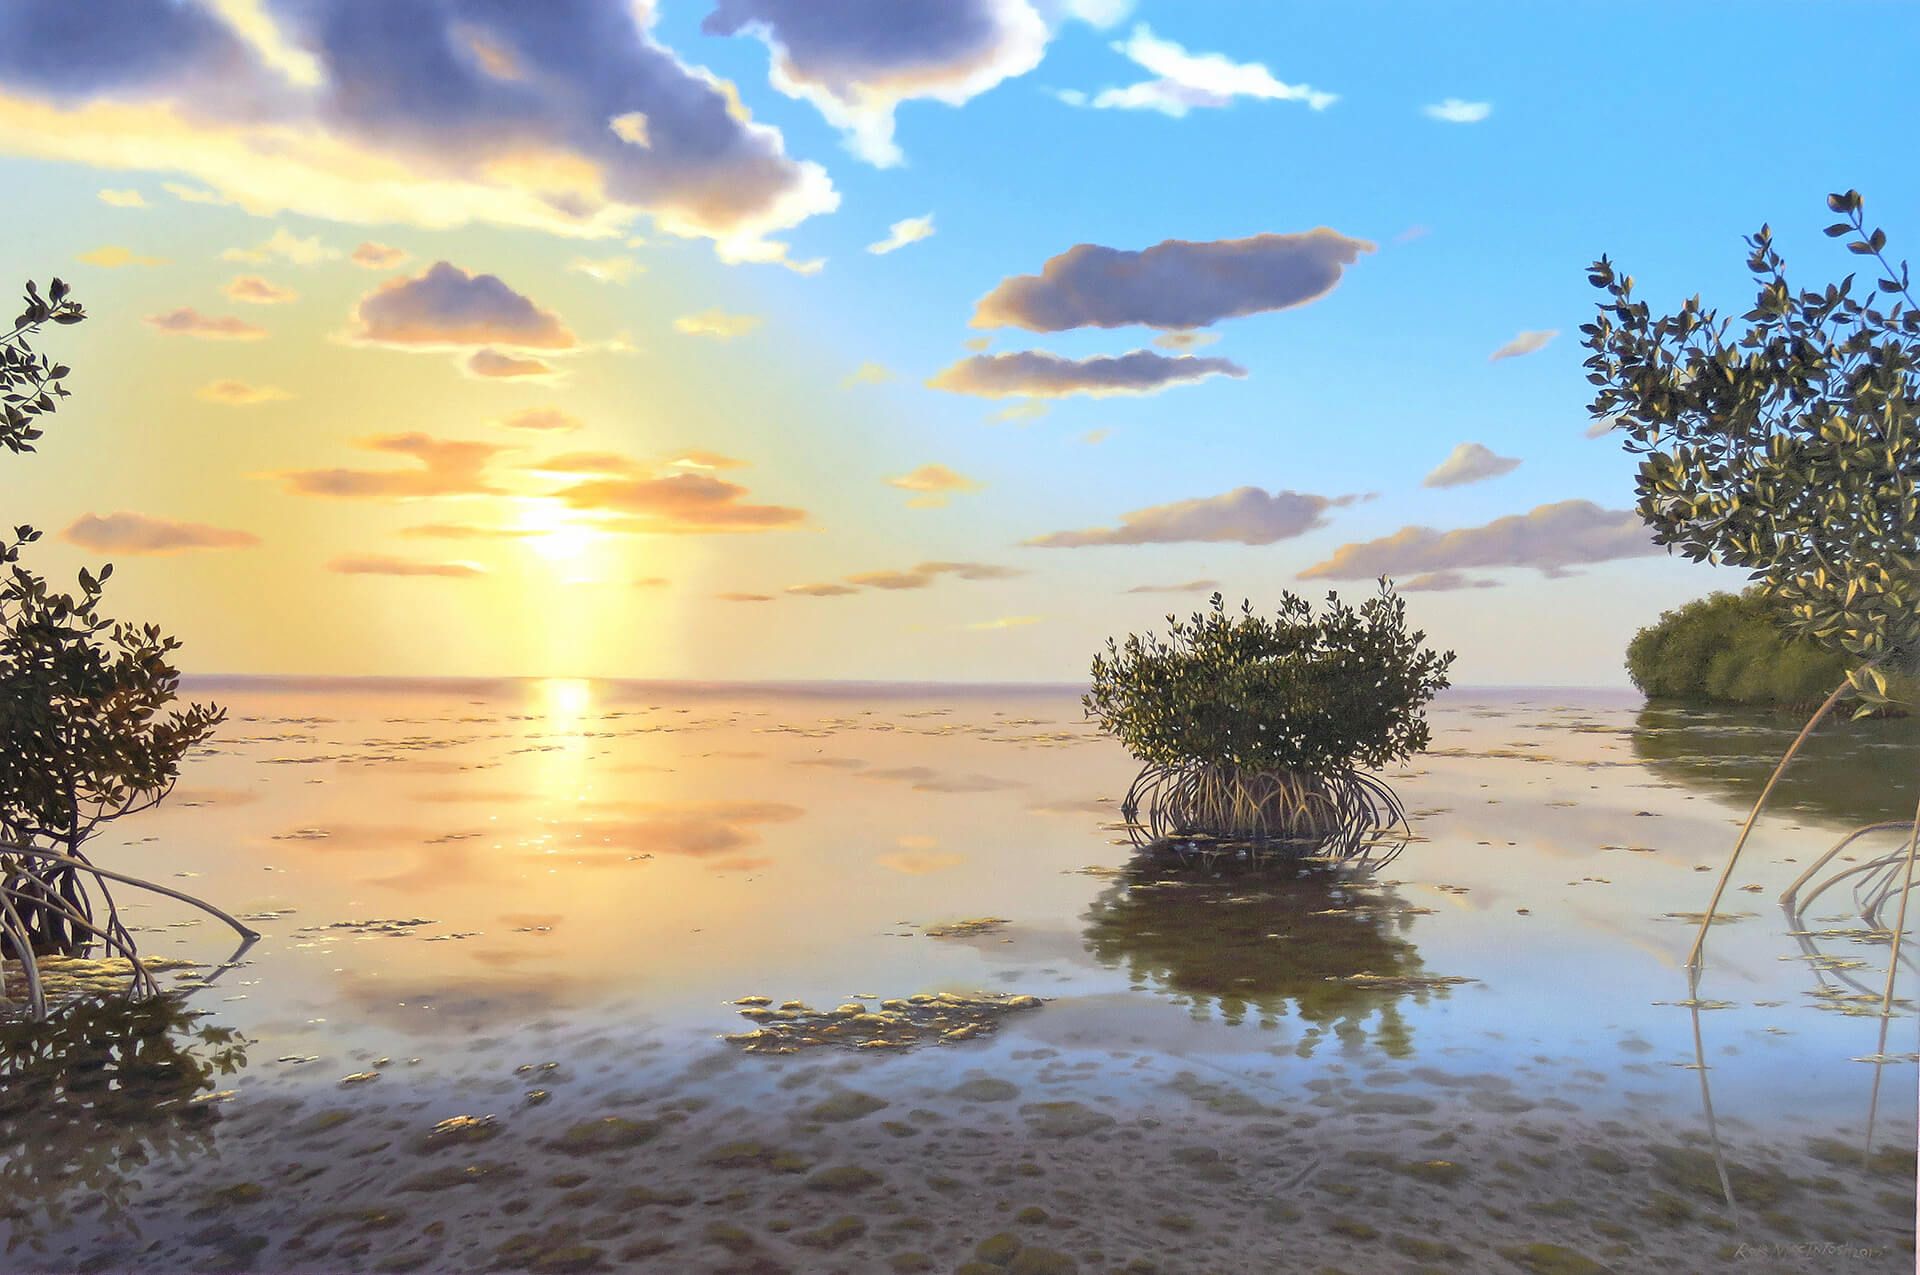 Photorealistic painting of mangroves during a sunset